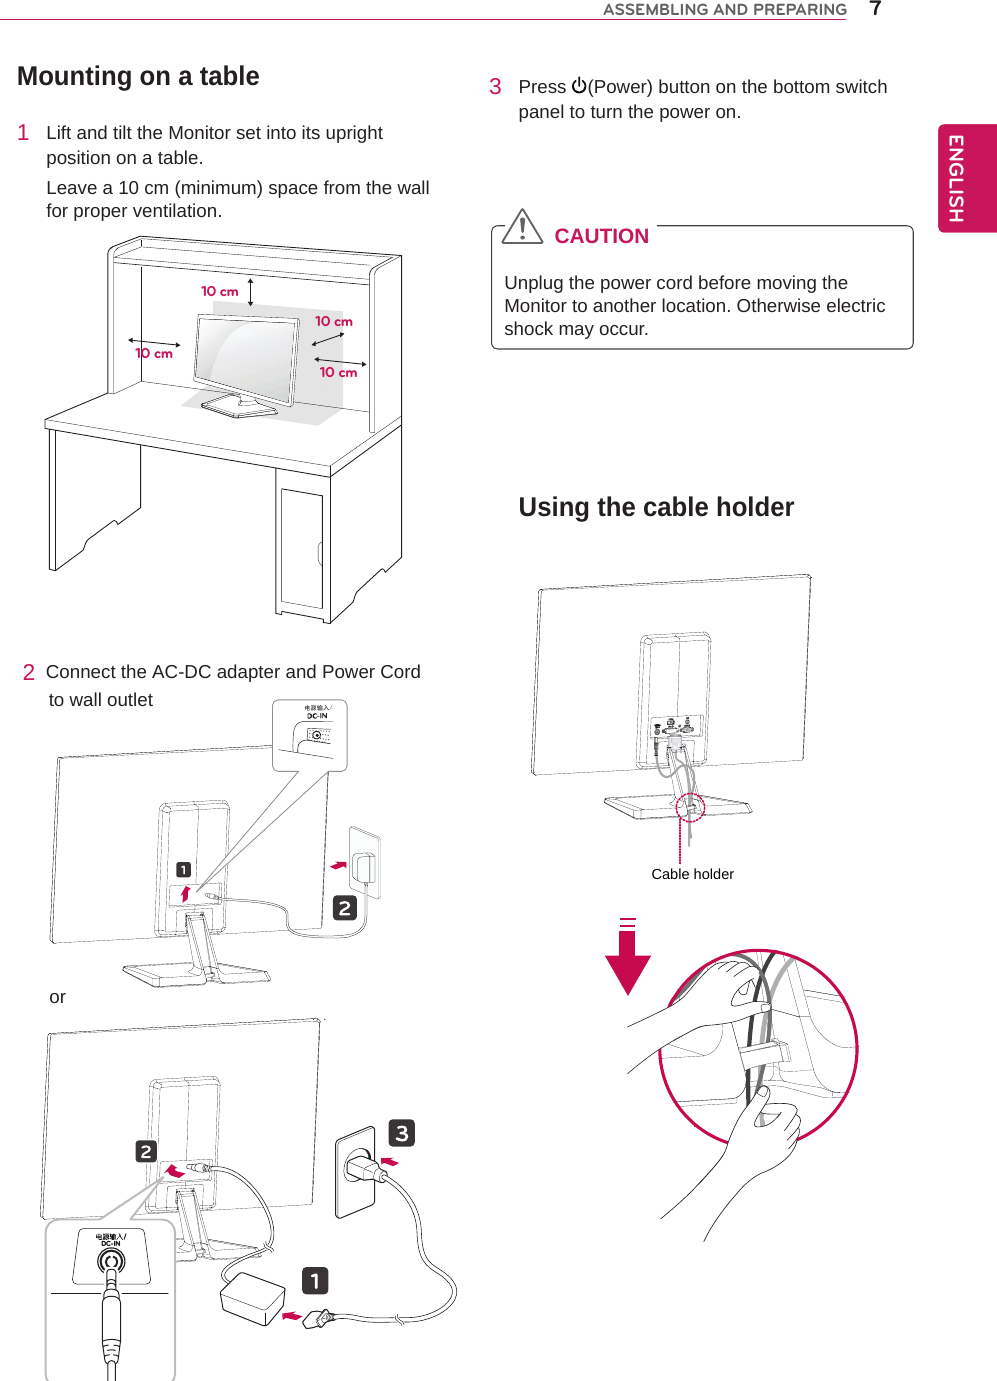 Mounting on a table1  Lift and tilt the Monitor set into its upright position on a table.Leave a 10 cm (minimum) space from the wall for proper ventilation.2  Connect the AC-DC adapter and Power Cord      to wall outlet3  Press  (Power) button on the bottom switch panel to turn the power on.CAUTIONUnplug the power cord before moving the Monitor to another location. Otherwise electric shock may occur.10 cm10 cm10 cm10 cmENGENGLISHASSEMBLING AND PREPARING 7Using the cable holderCable holder电源输入/DC-IN /or